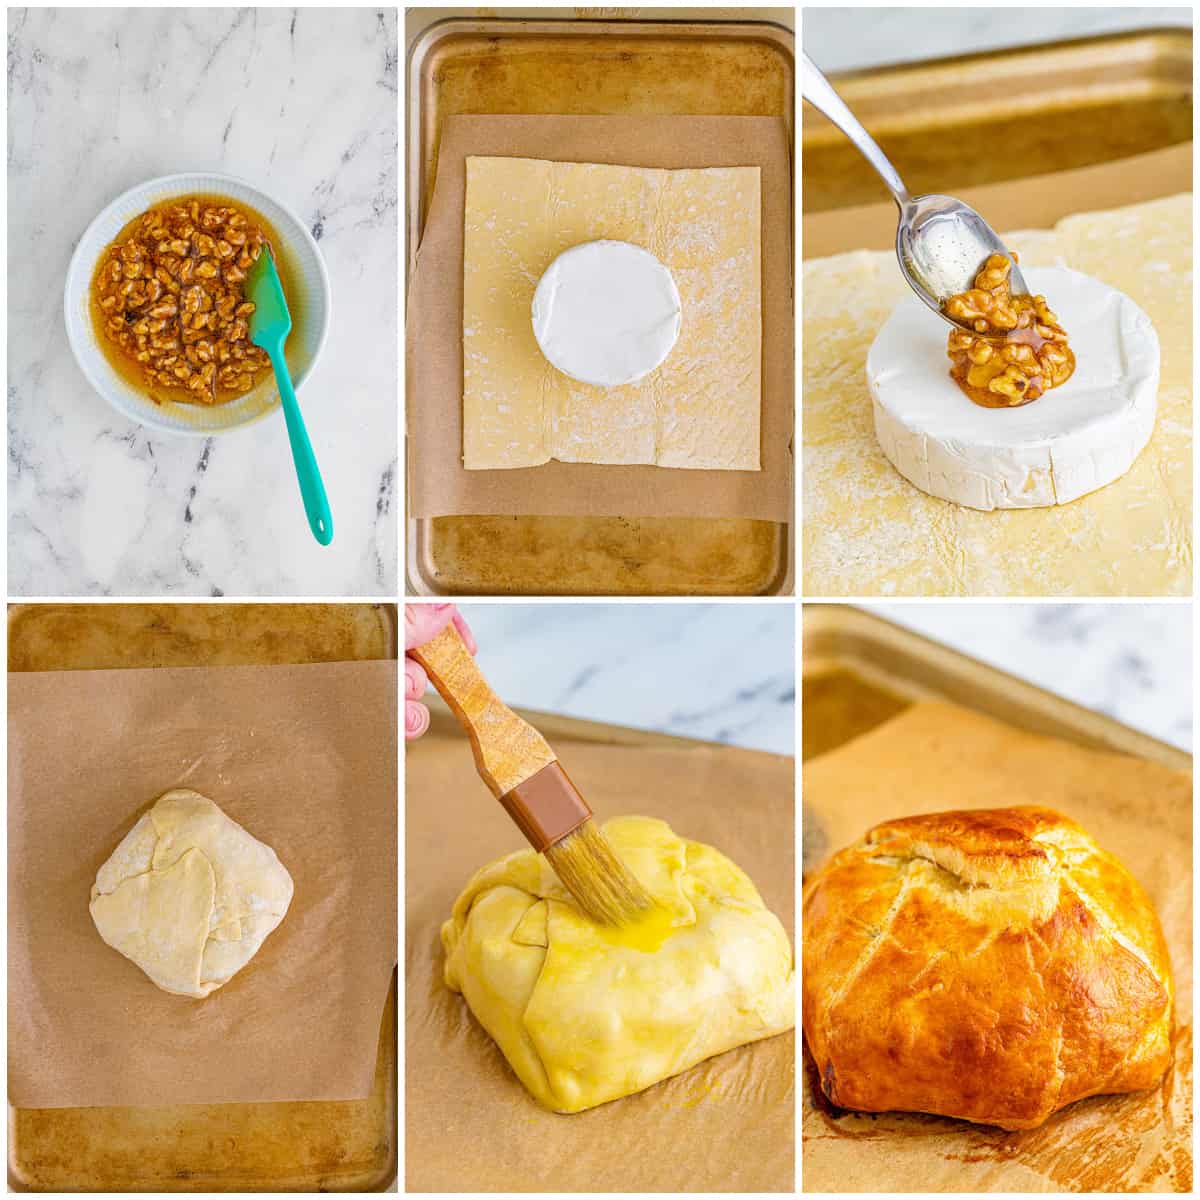 Step by step photos on how to make a Baked Brie Recipe.